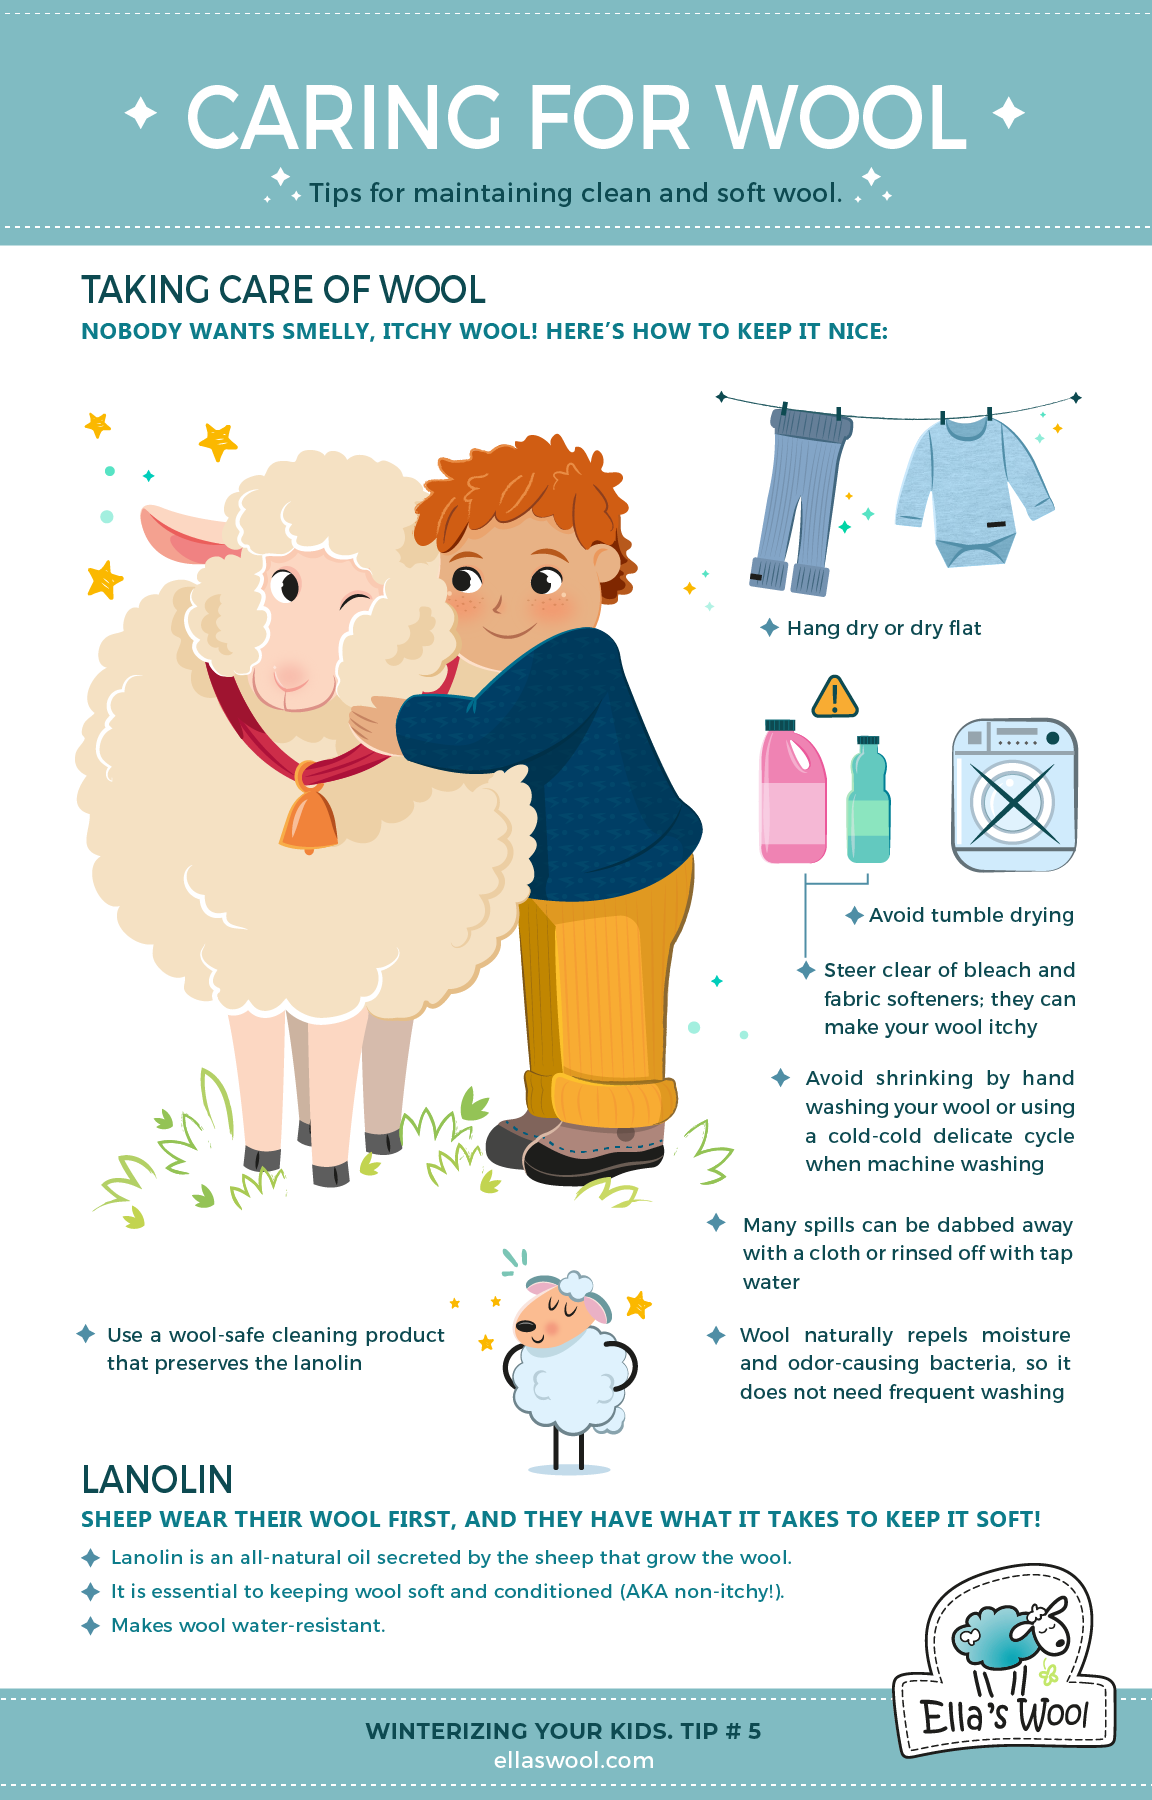 How to care for your wool (infographic)